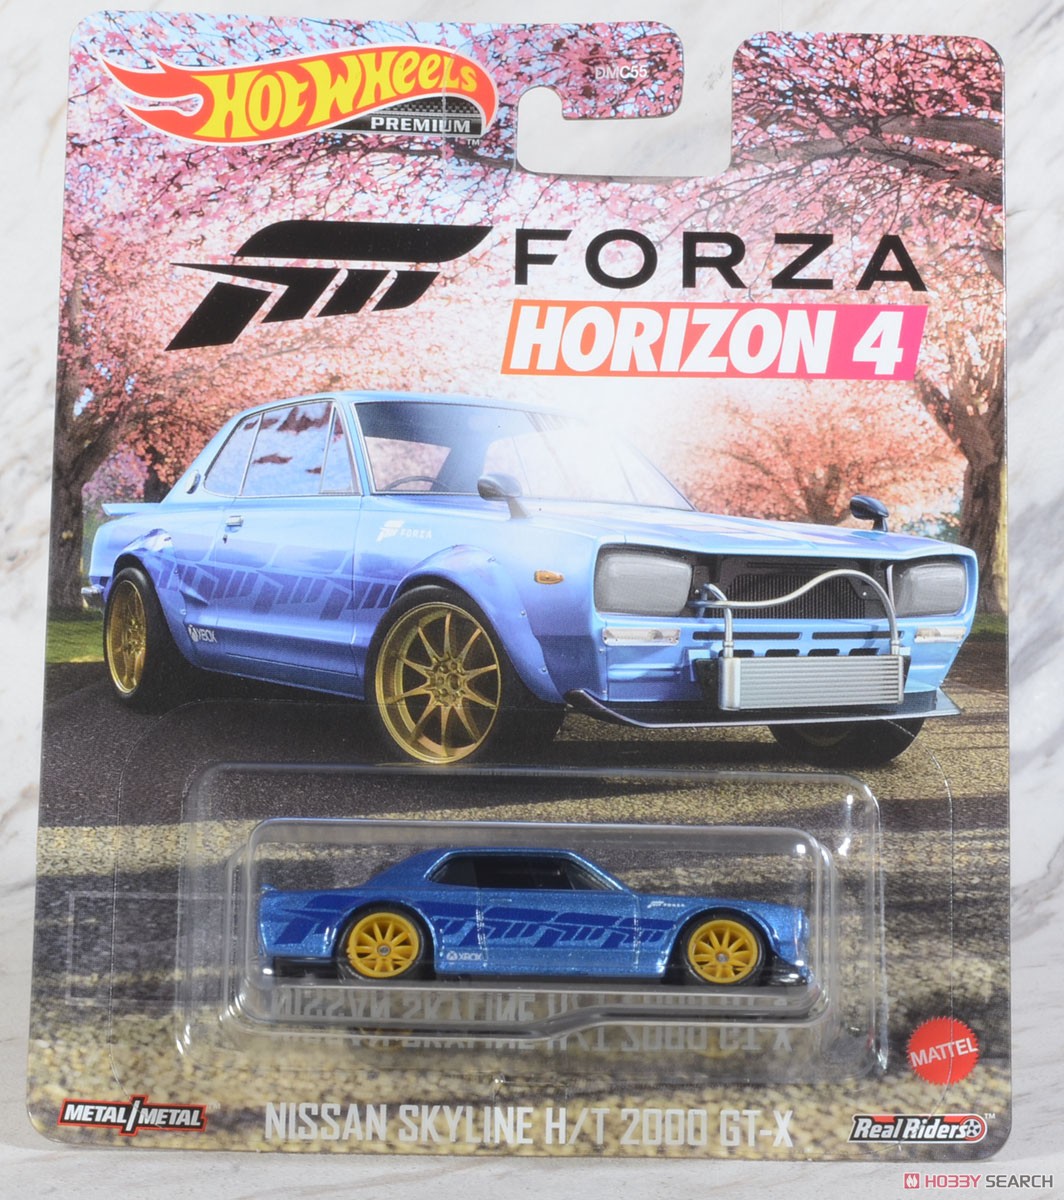 Hot Wheels Retro Entertainment - Nissan Skyline H/T 2000 GT-X (Toy) Package1